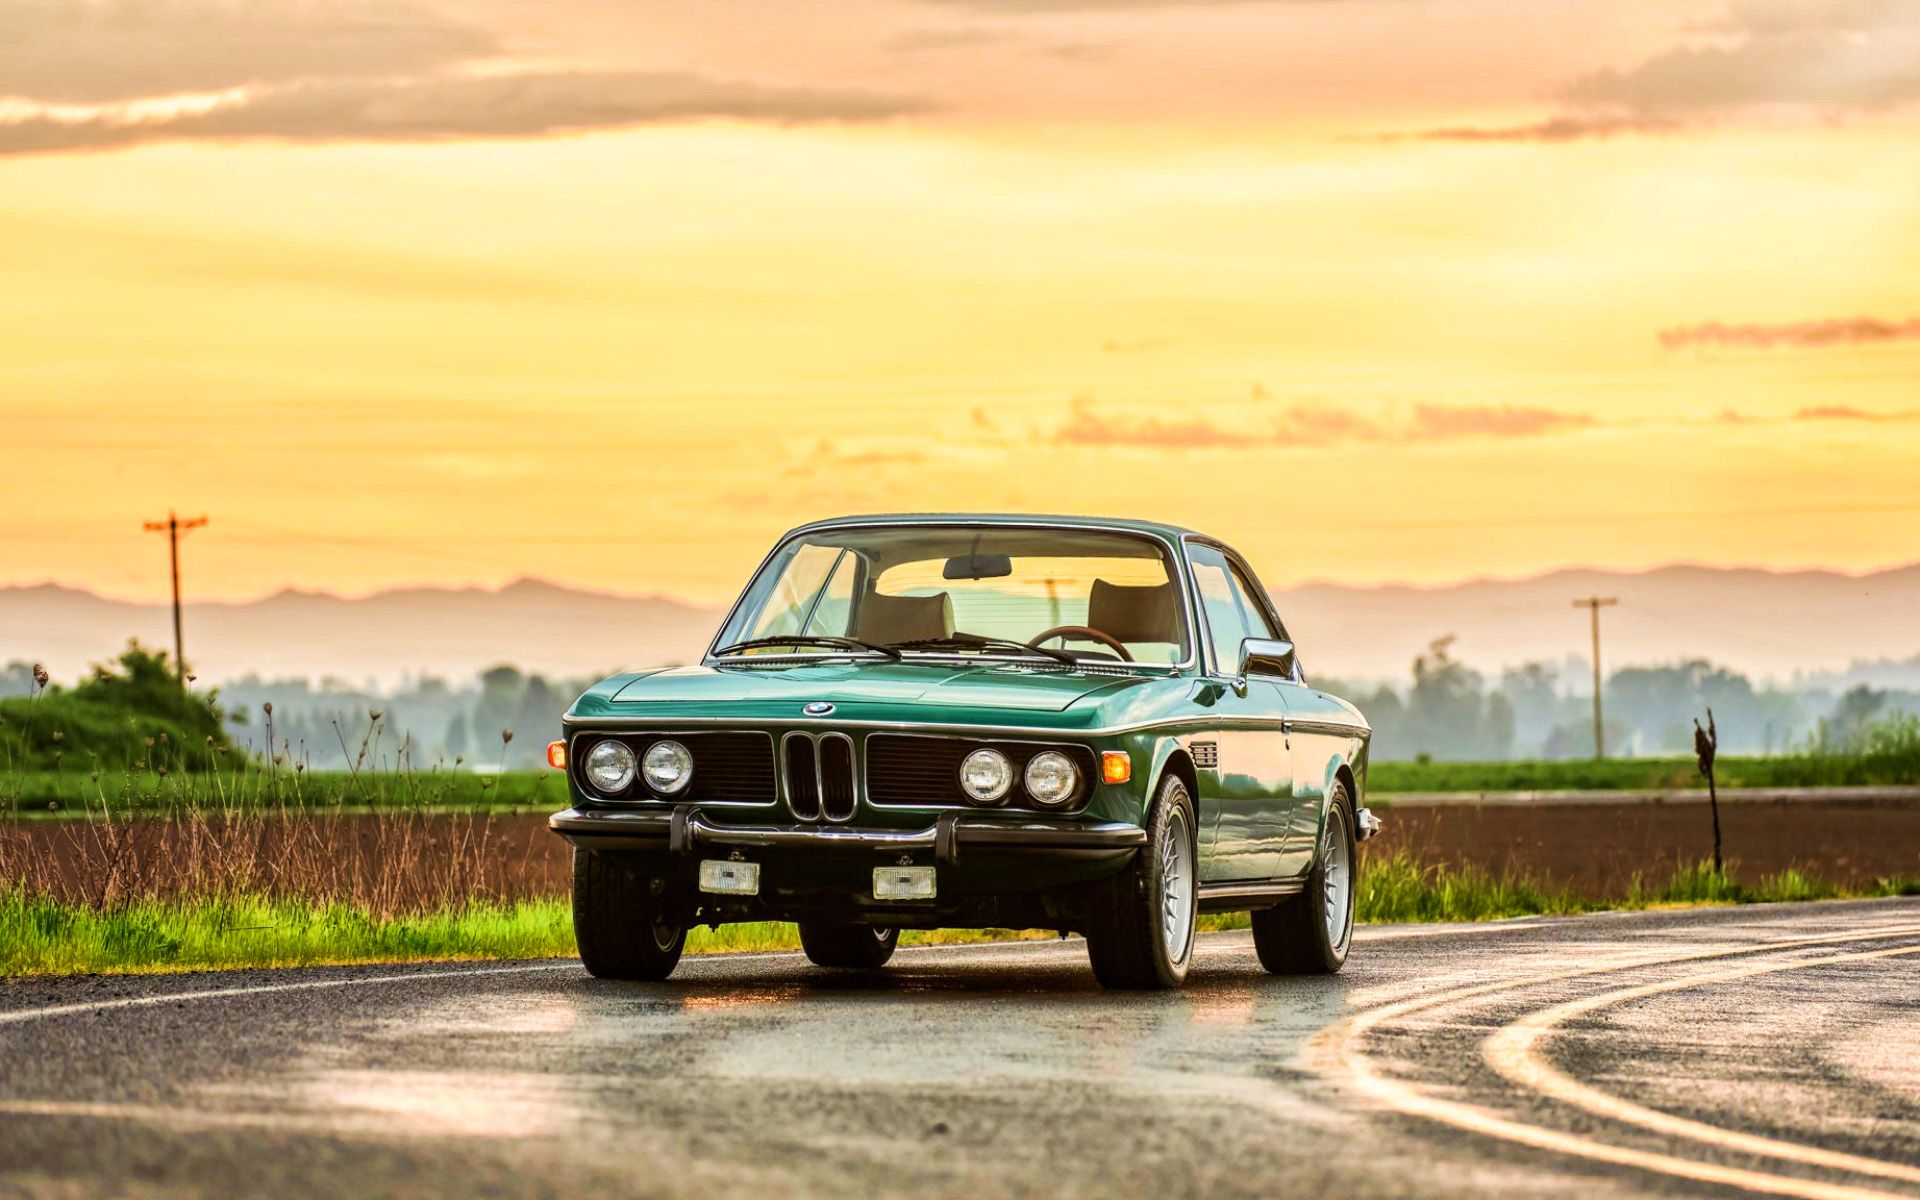 Download wallpaper BMW E retro cars, 1974 cars, BMW New Six, sunset, supecars, 1974 BMW E BMW 3 0CS, BMW for desktop with resolution 1920x1200. High Quality HD picture wallpaper